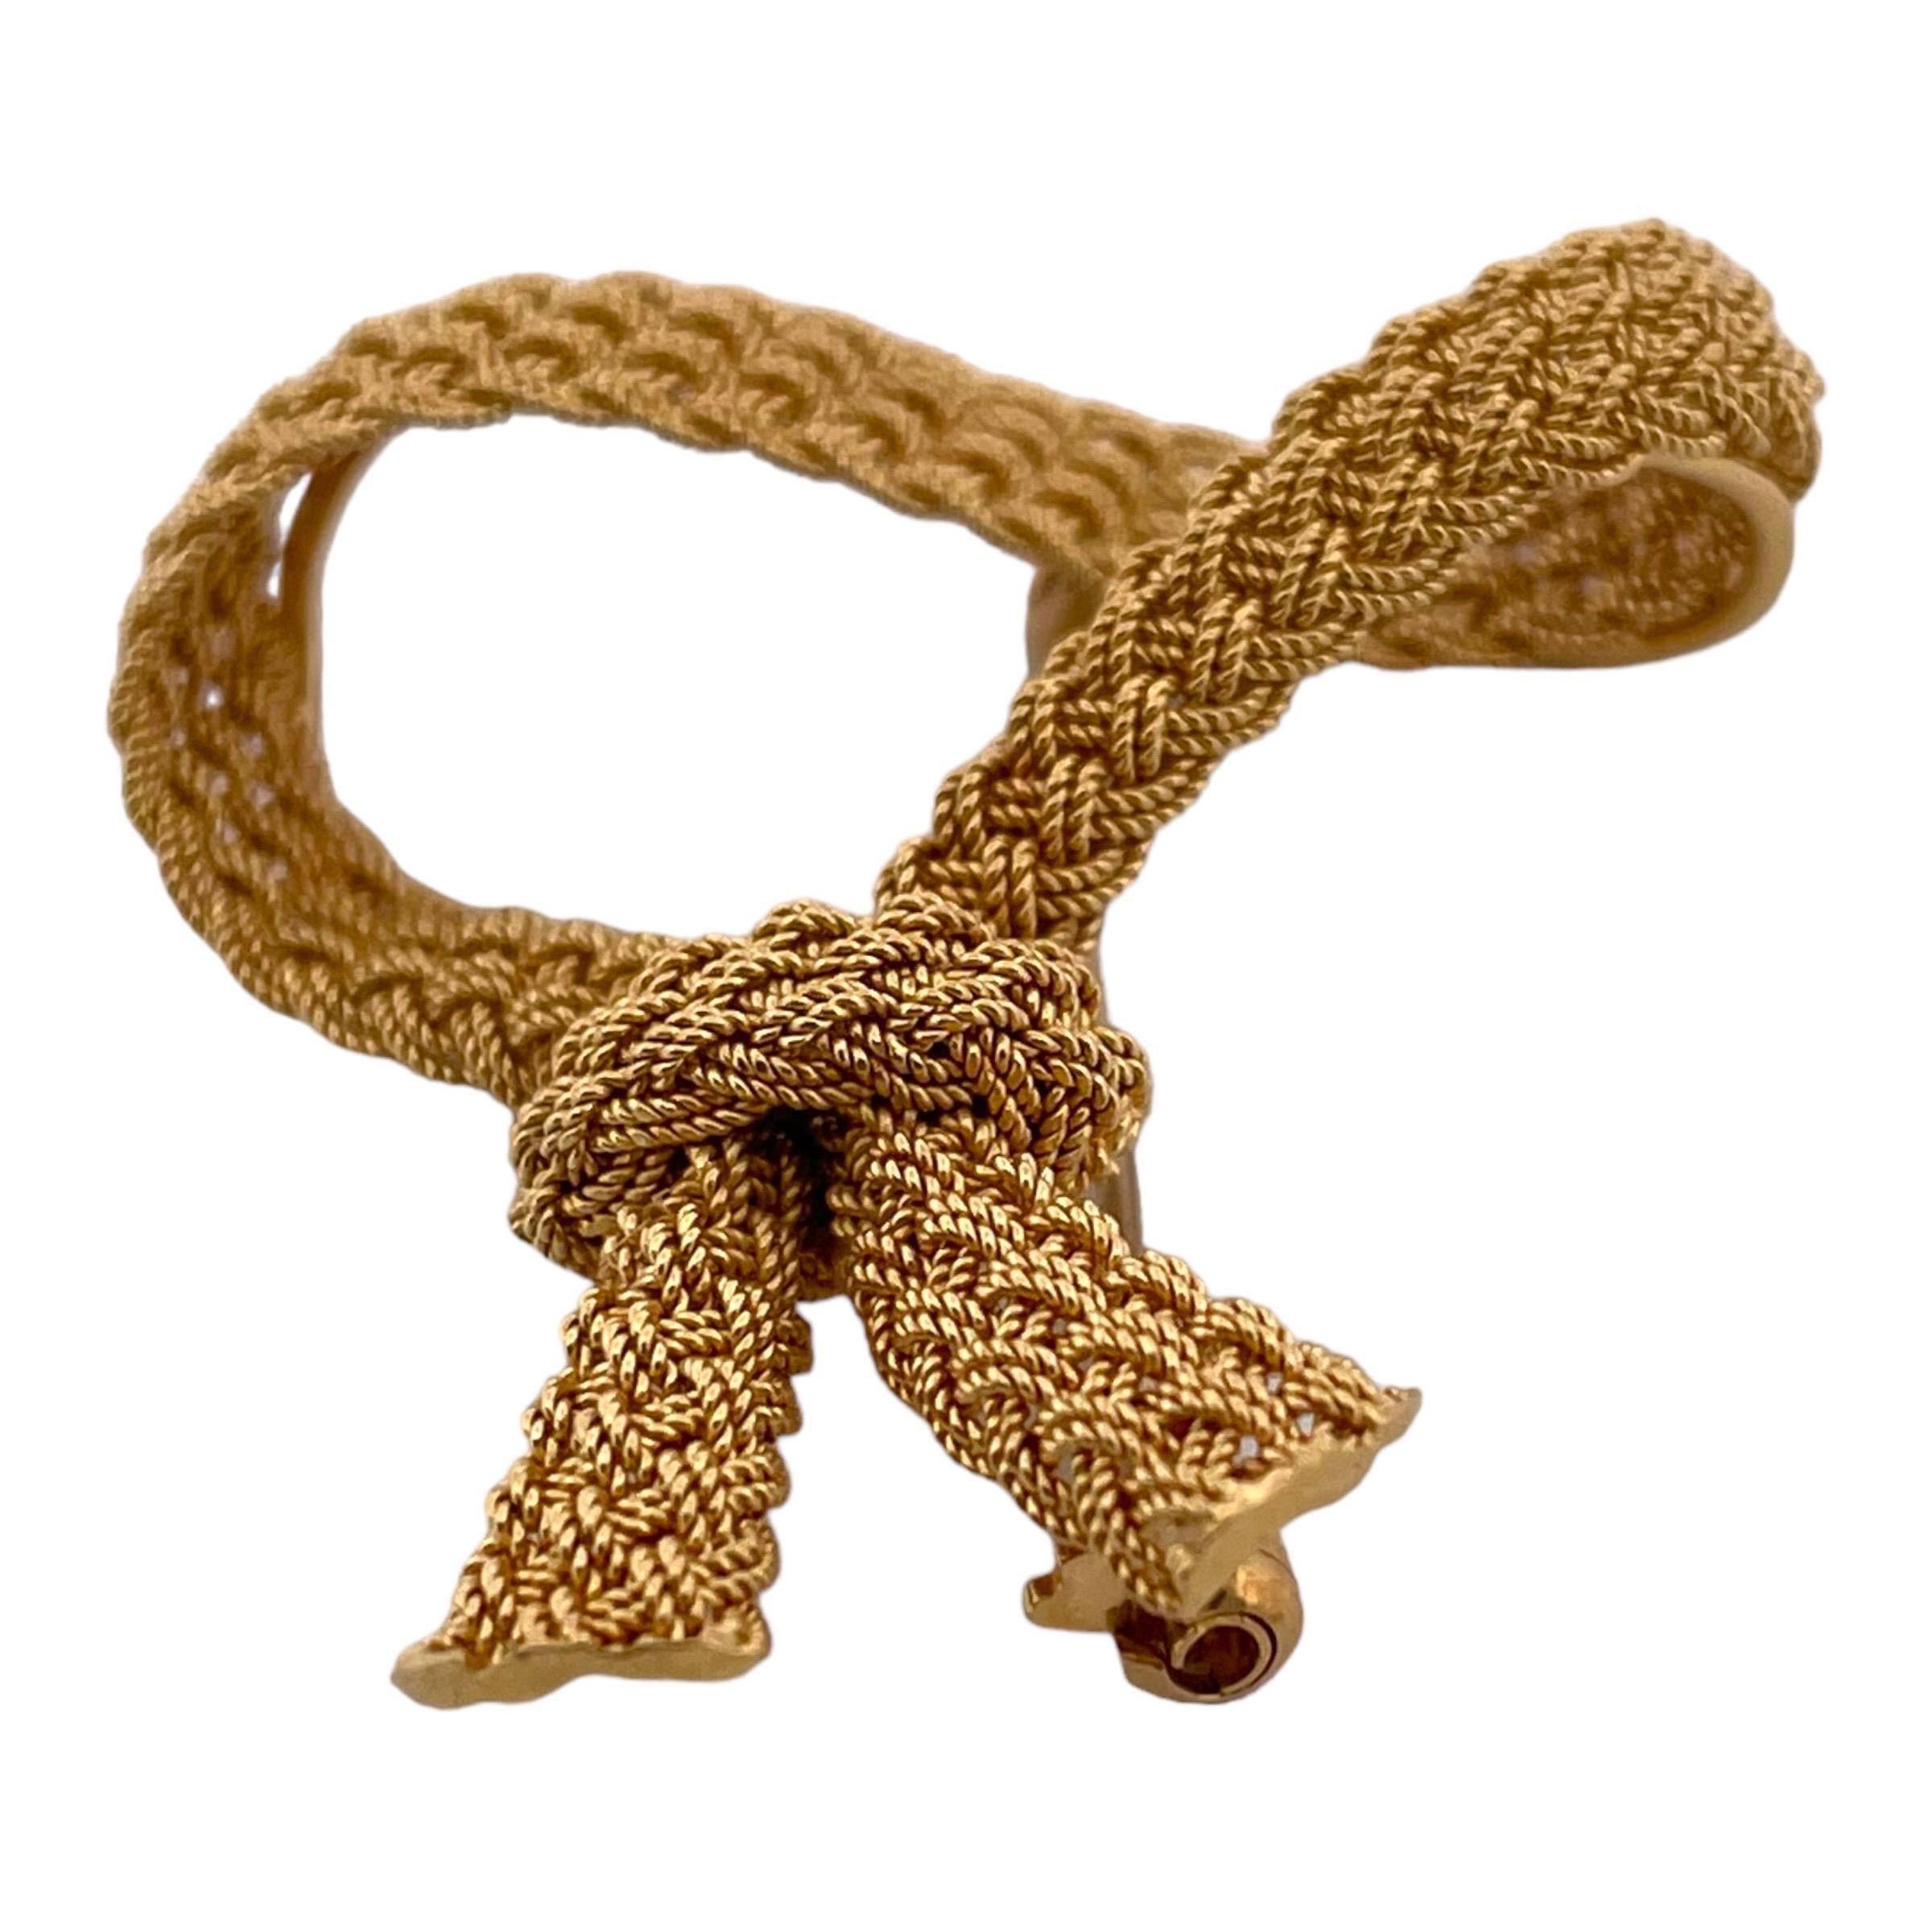 Step back in time with this exquisite Vintage Mesh Ribbon Brooch, fashioned from the finest 14K yellow gold. Weighing 9.6 grams, this intricately woven brooch captures the essence of classic elegance. Its mesh design creates a delicate ribbon-like